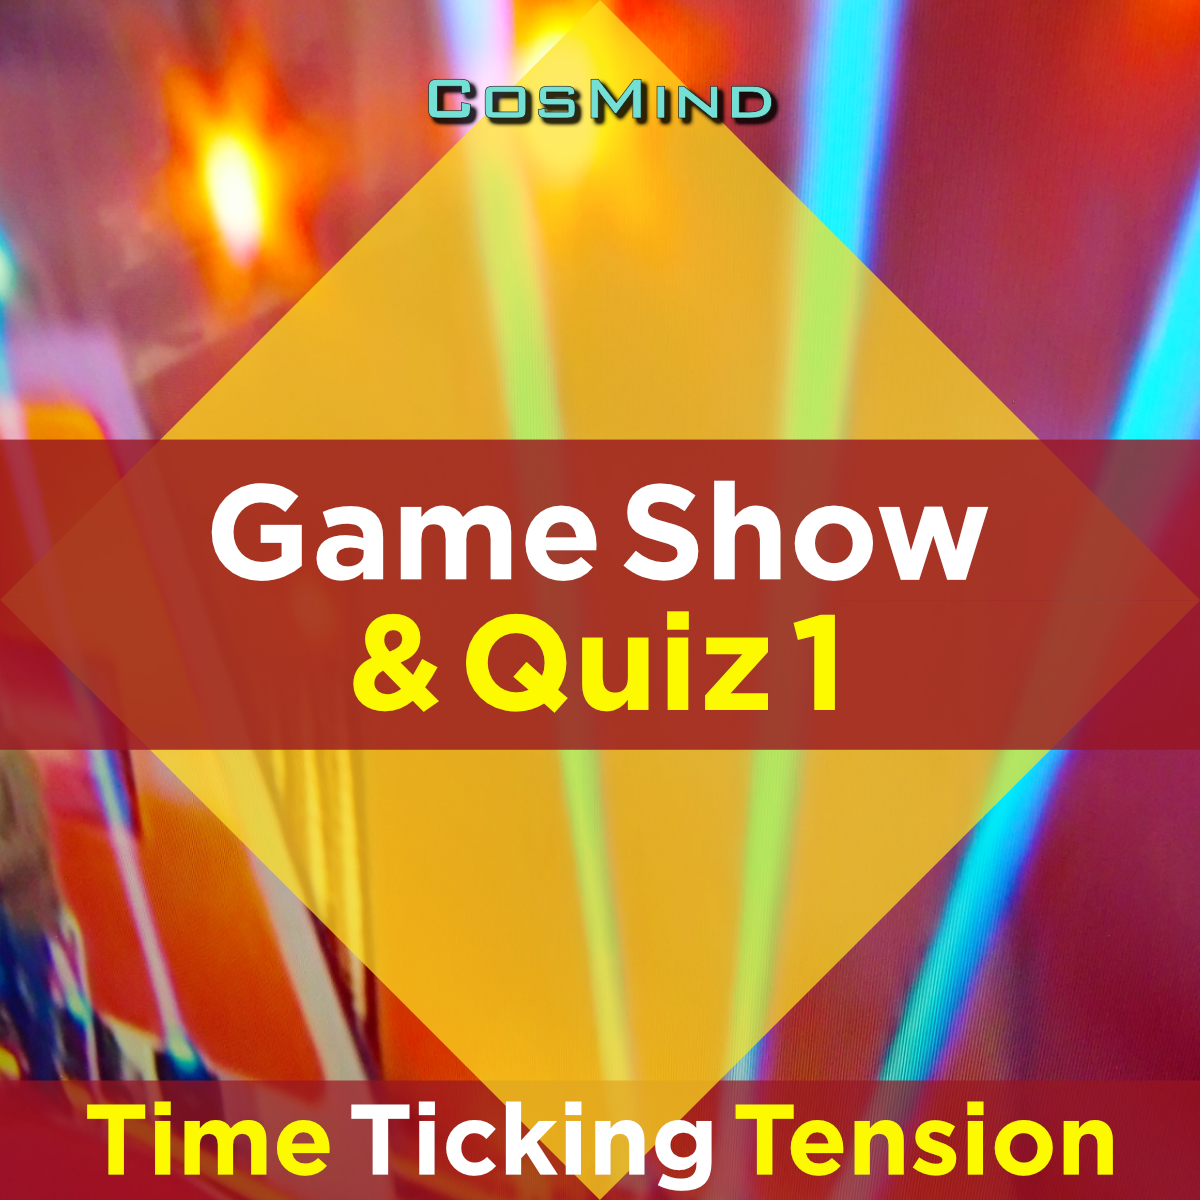 Game Show & Quiz 1 - Time Ticking Tension Beds